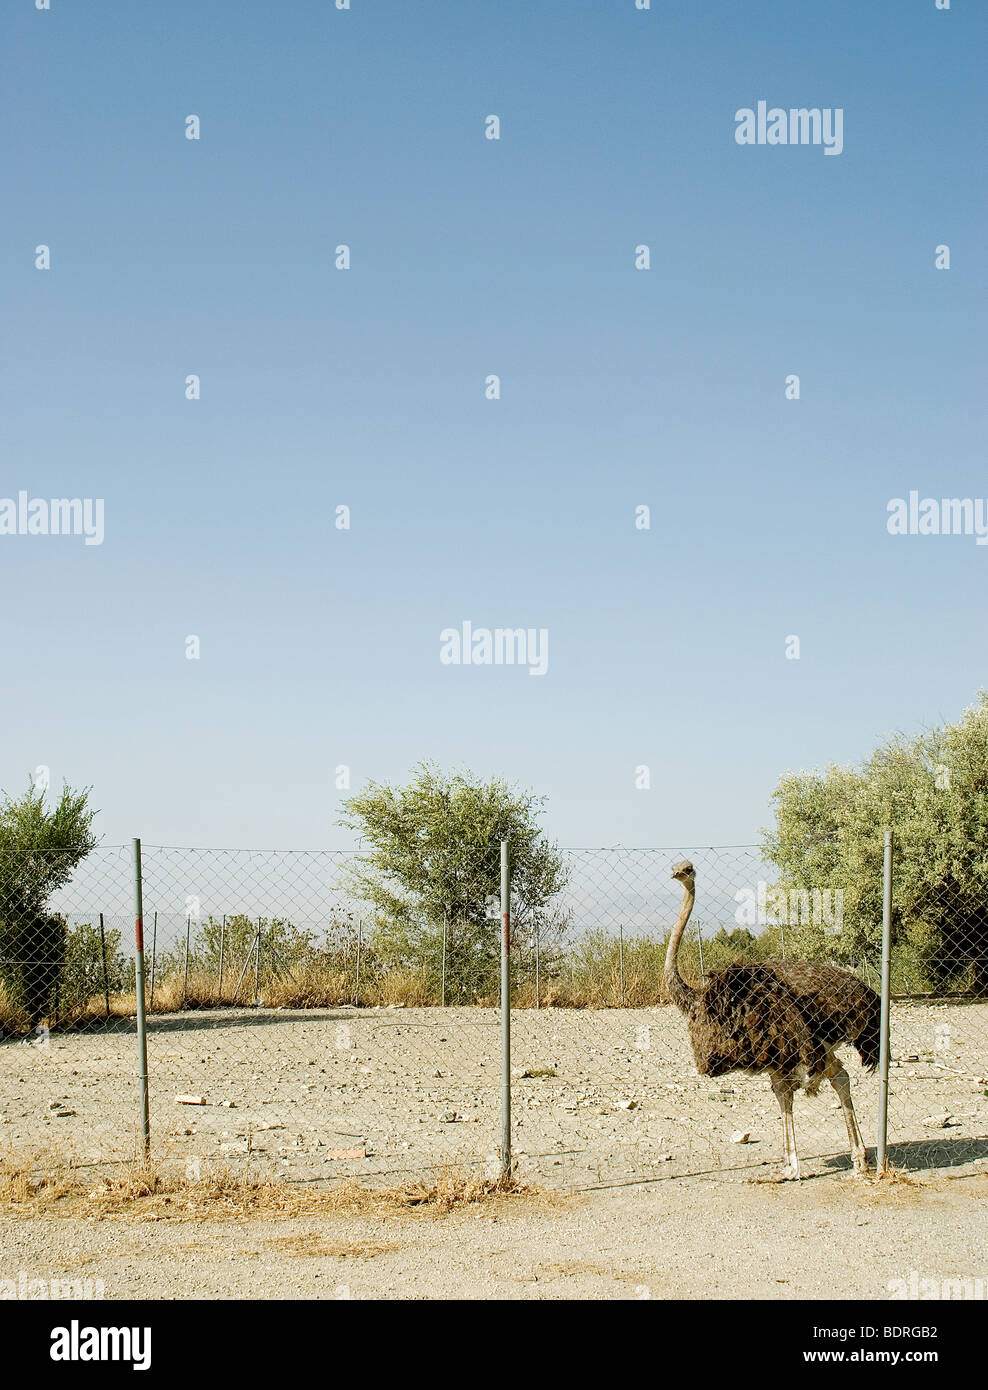 Emu standing behind a fence in Spain Stock Photo